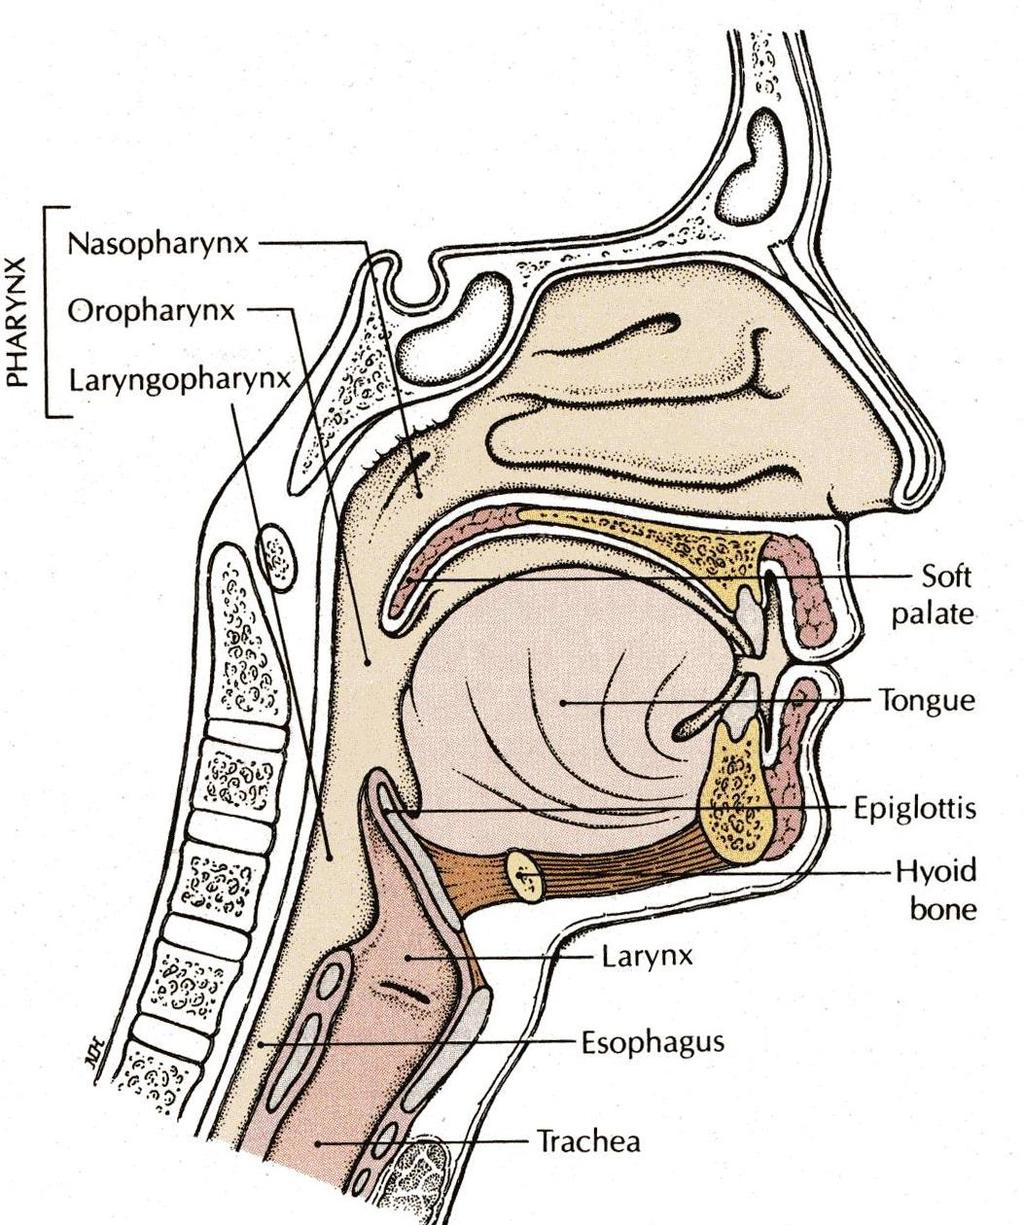 TONGUE Tongue is a mass of striated muscles covered with mucous membrane. Its anterior 2/3 lies in the mouth, and its posterior 1/3 lies in the pharynx.